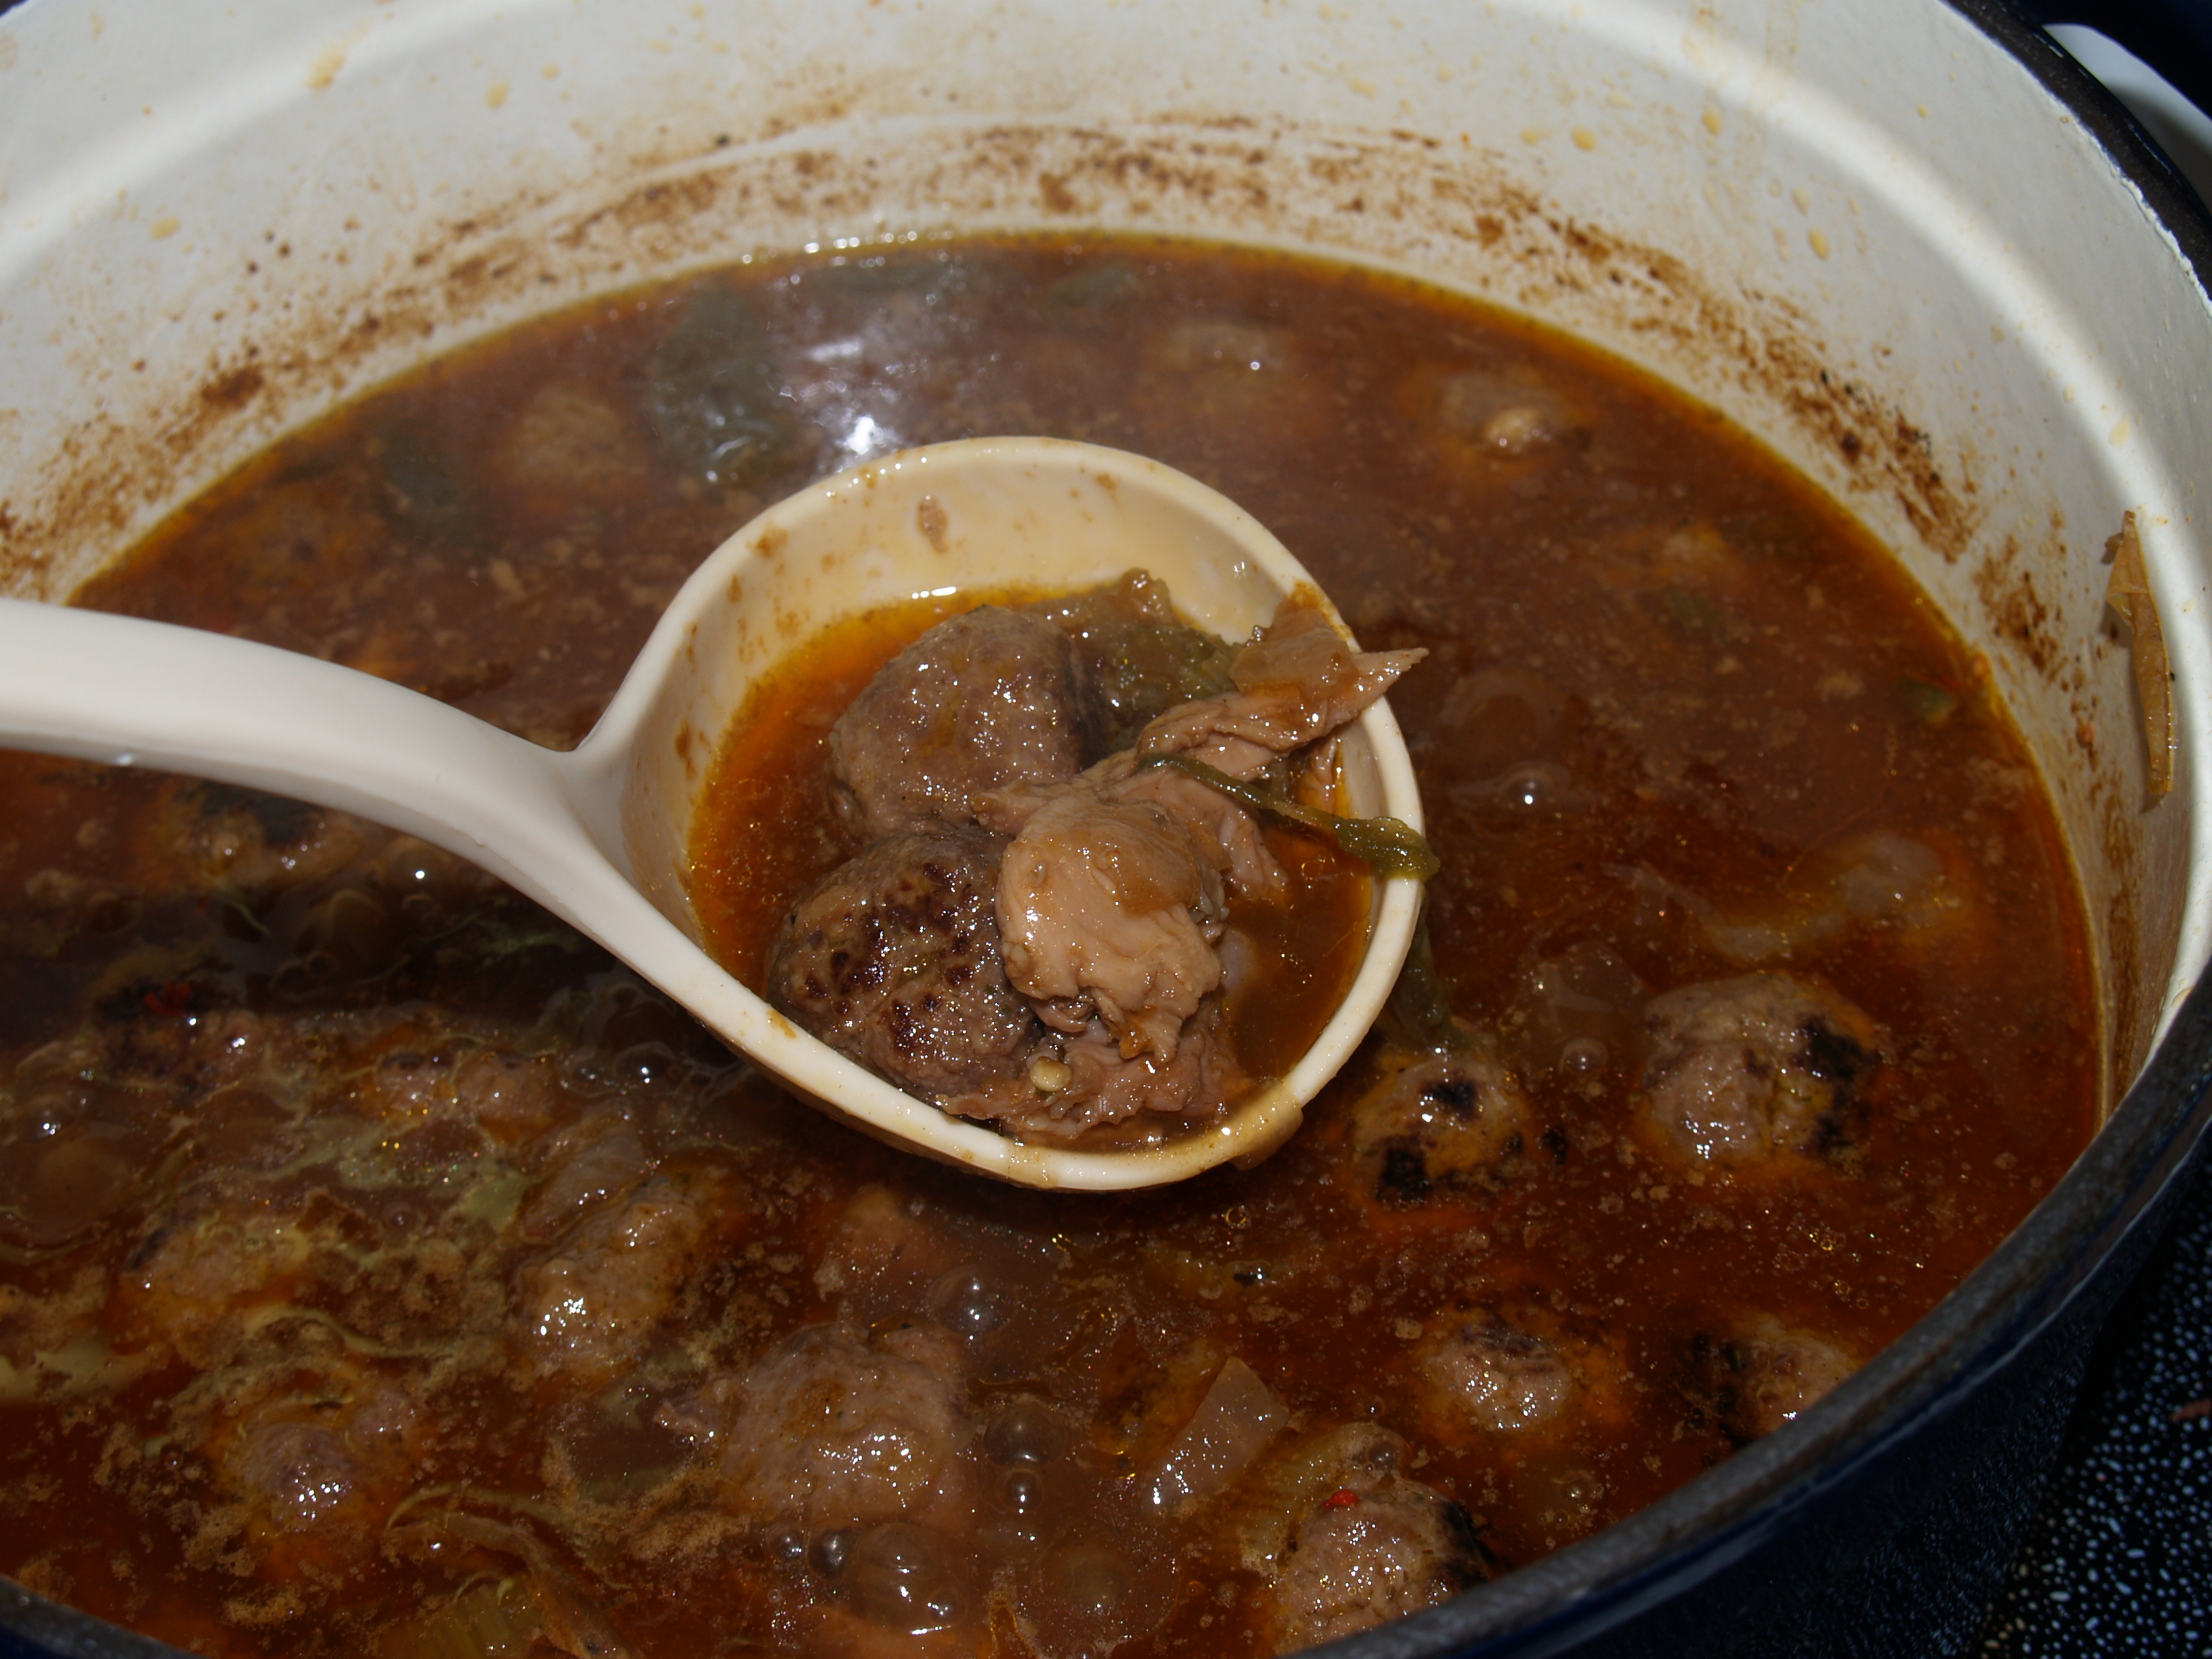 Deer (Venison) and Duck Gumbo from Kelli's Kitchen